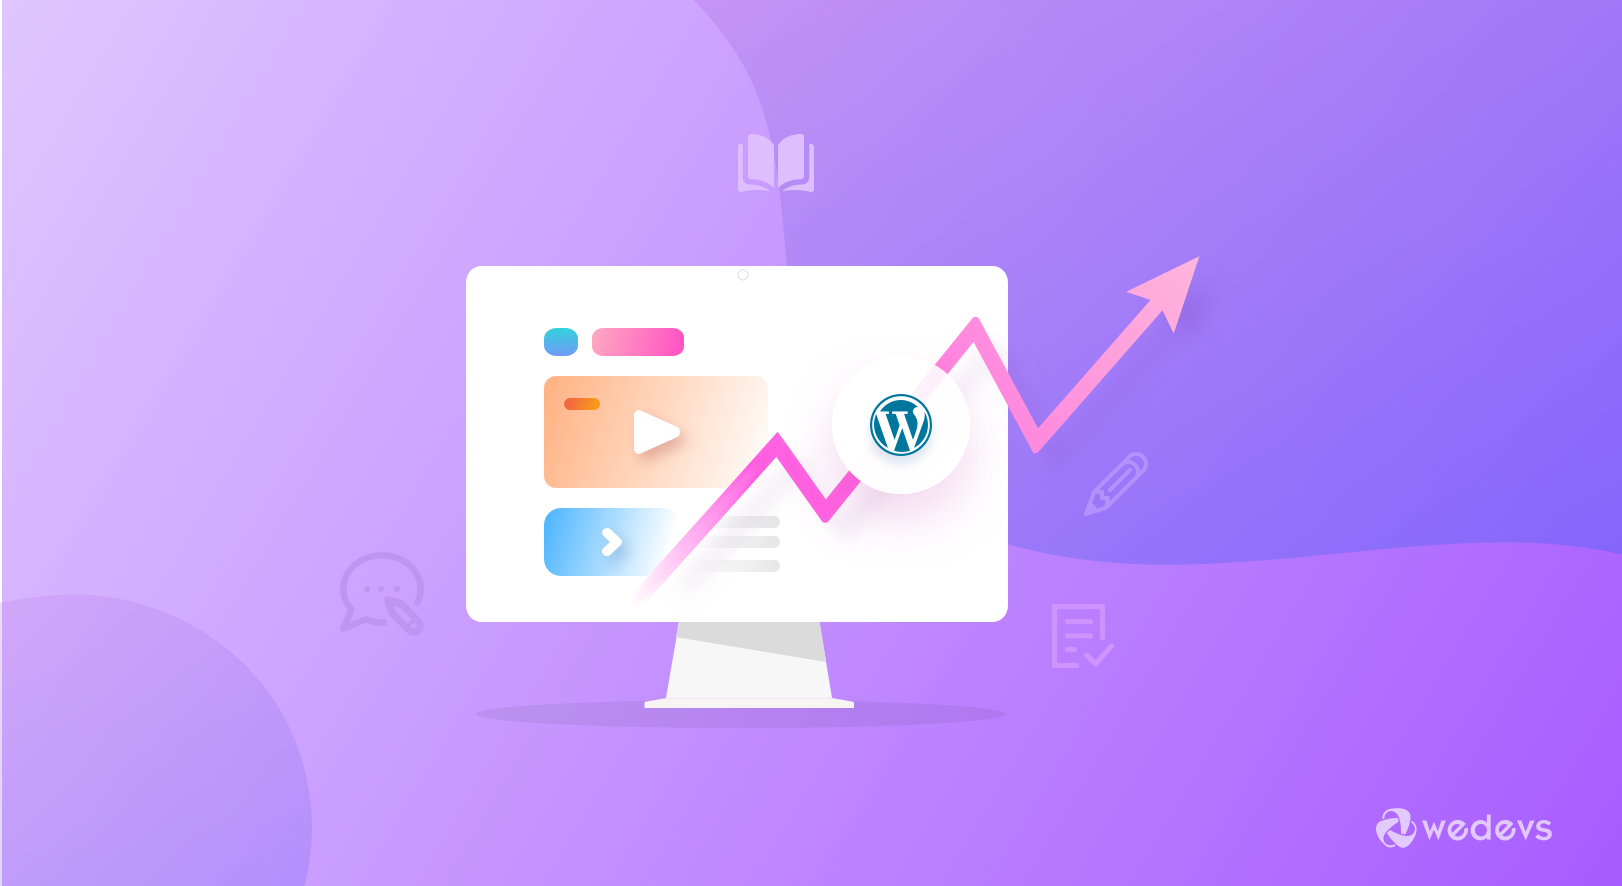 7 Ways to Increase WordPress Blog Traffic by Updating Your Content